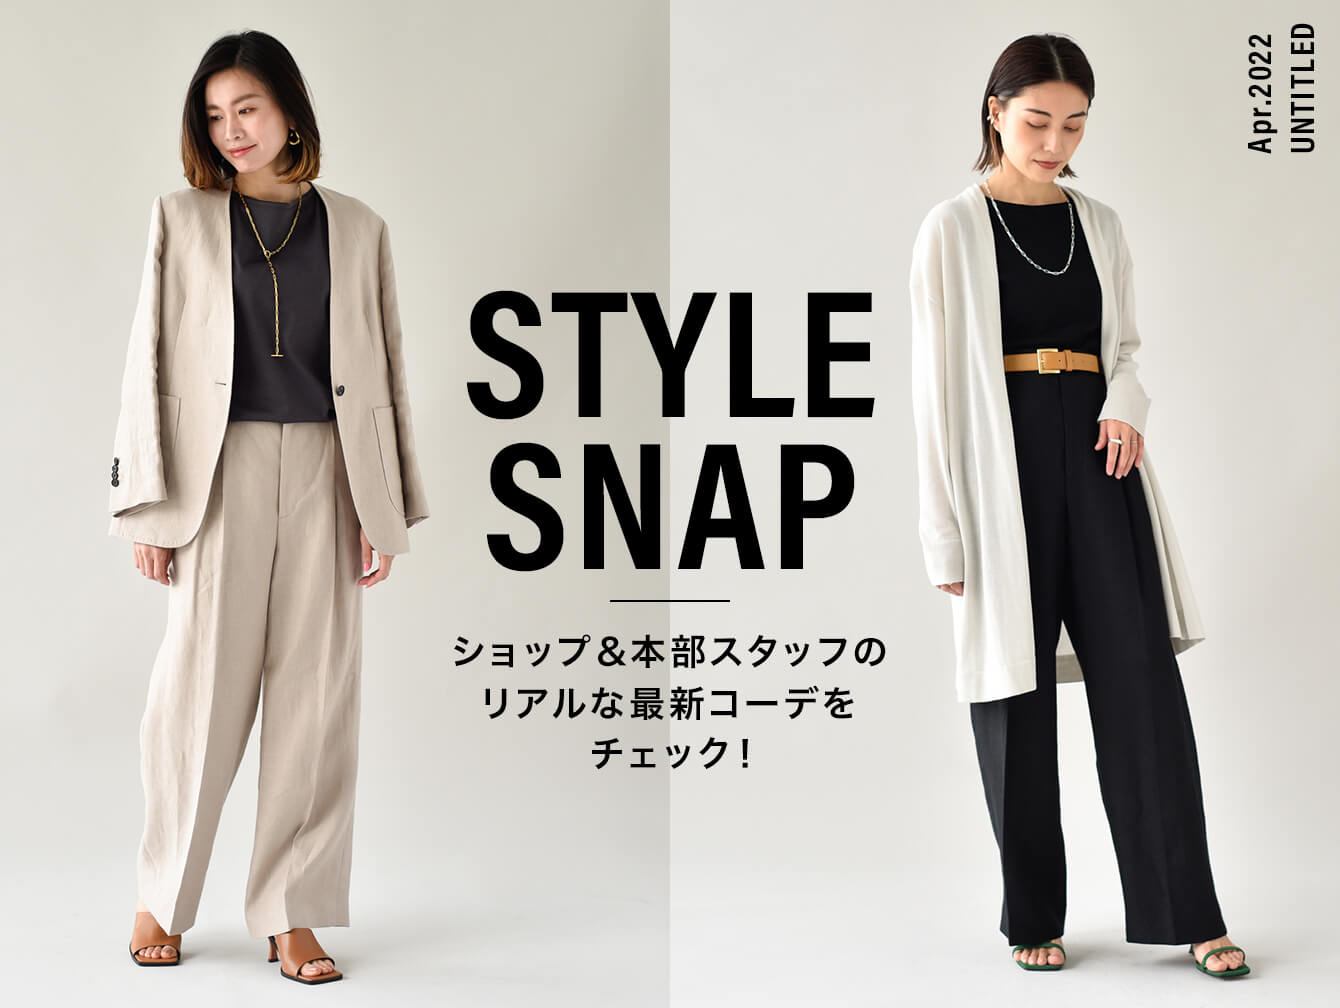 STYLE SNAP